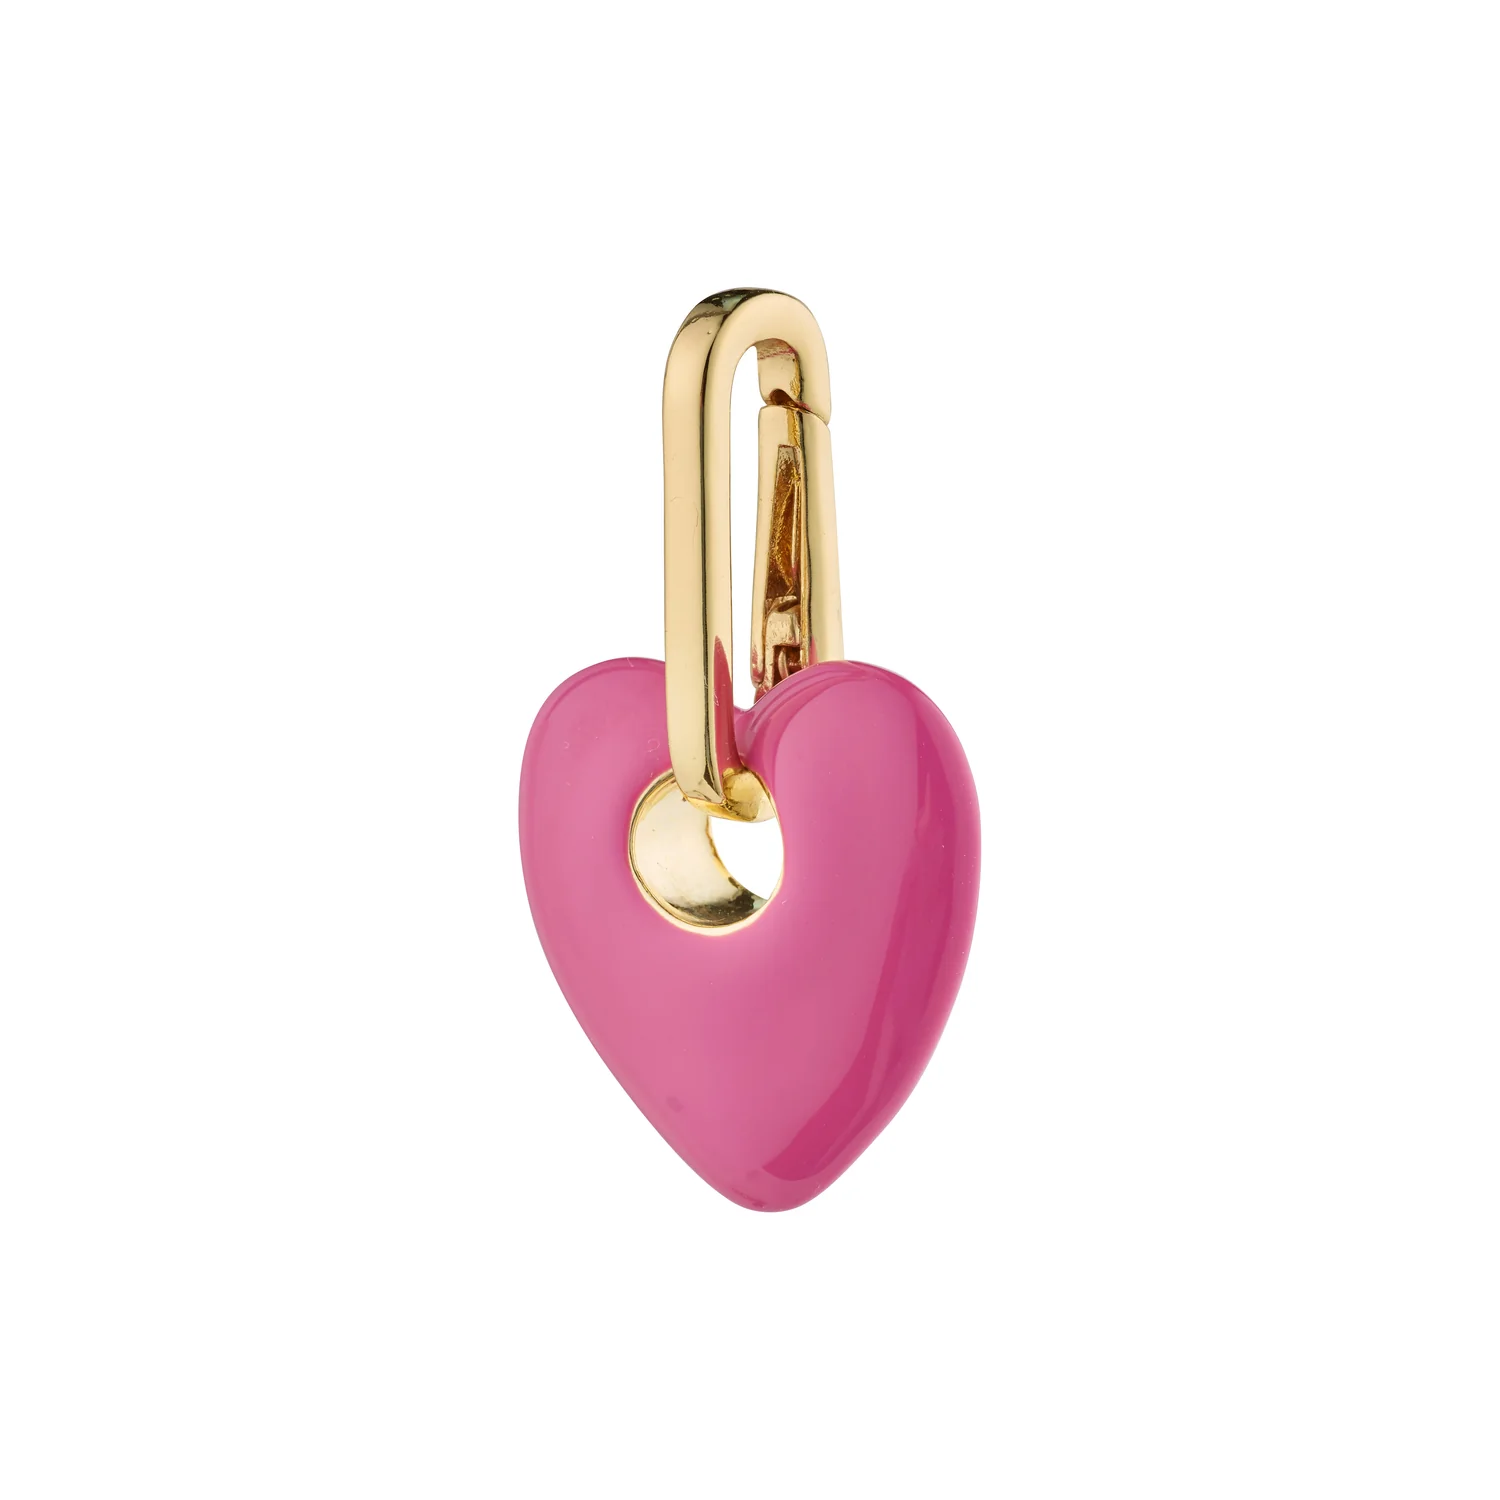 Pilgrim Charm Recycled Heart Pendant - Pink/Gold Accessories - Jewelry by Pilgrim | Grace the Boutique